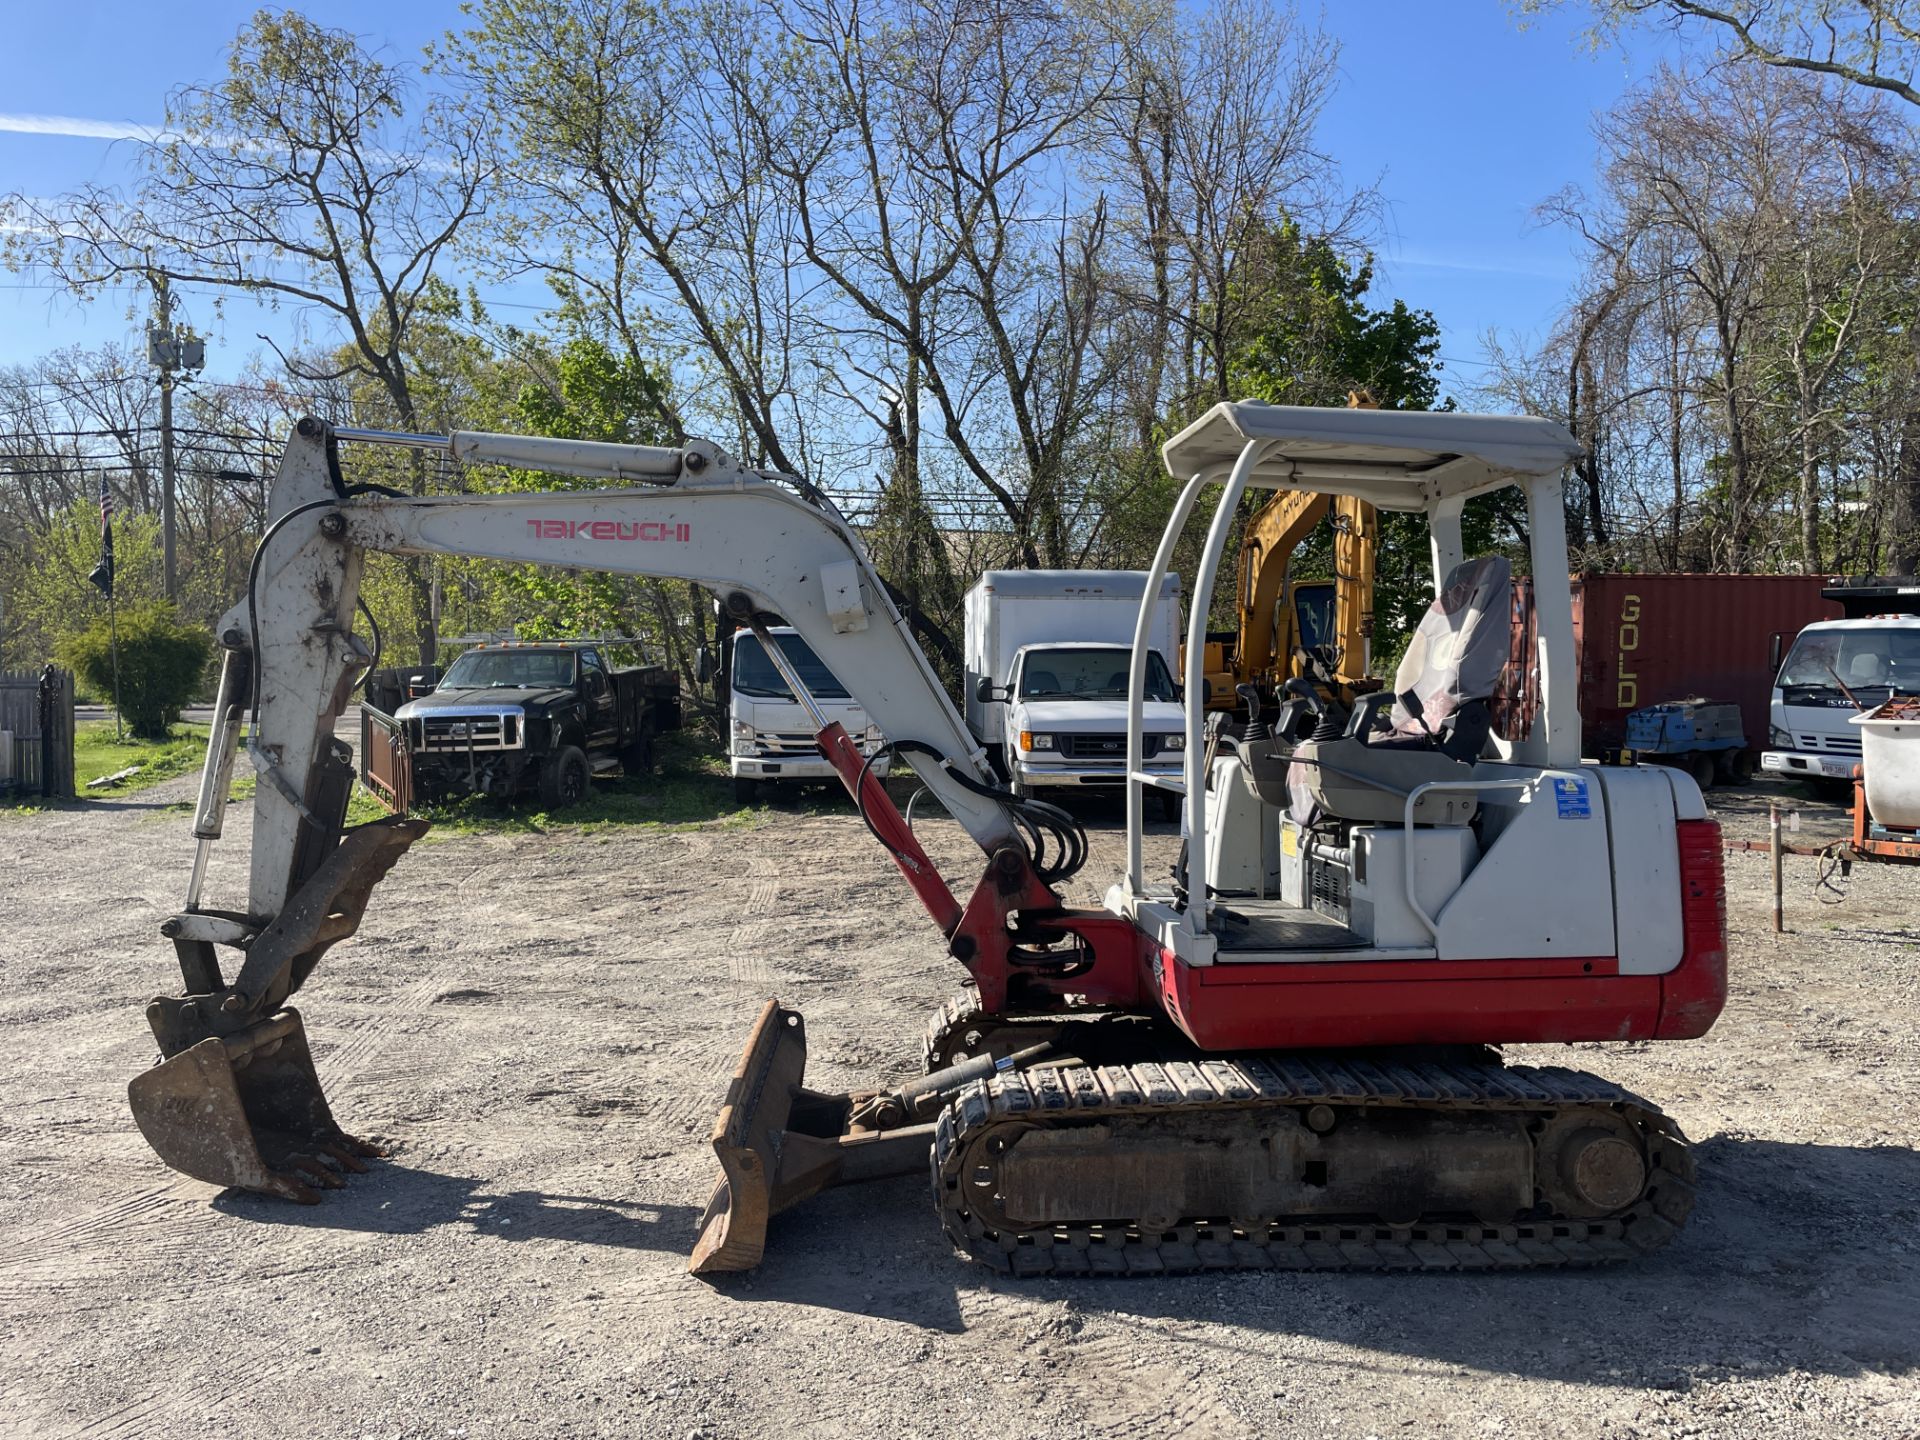 (VIDEO) 2006 Takeuchi #TB135 Diesel Steel Track Mini Excavator, Open Cab w/Rops, Hrs: 4,654, SN:1351 - Image 2 of 9